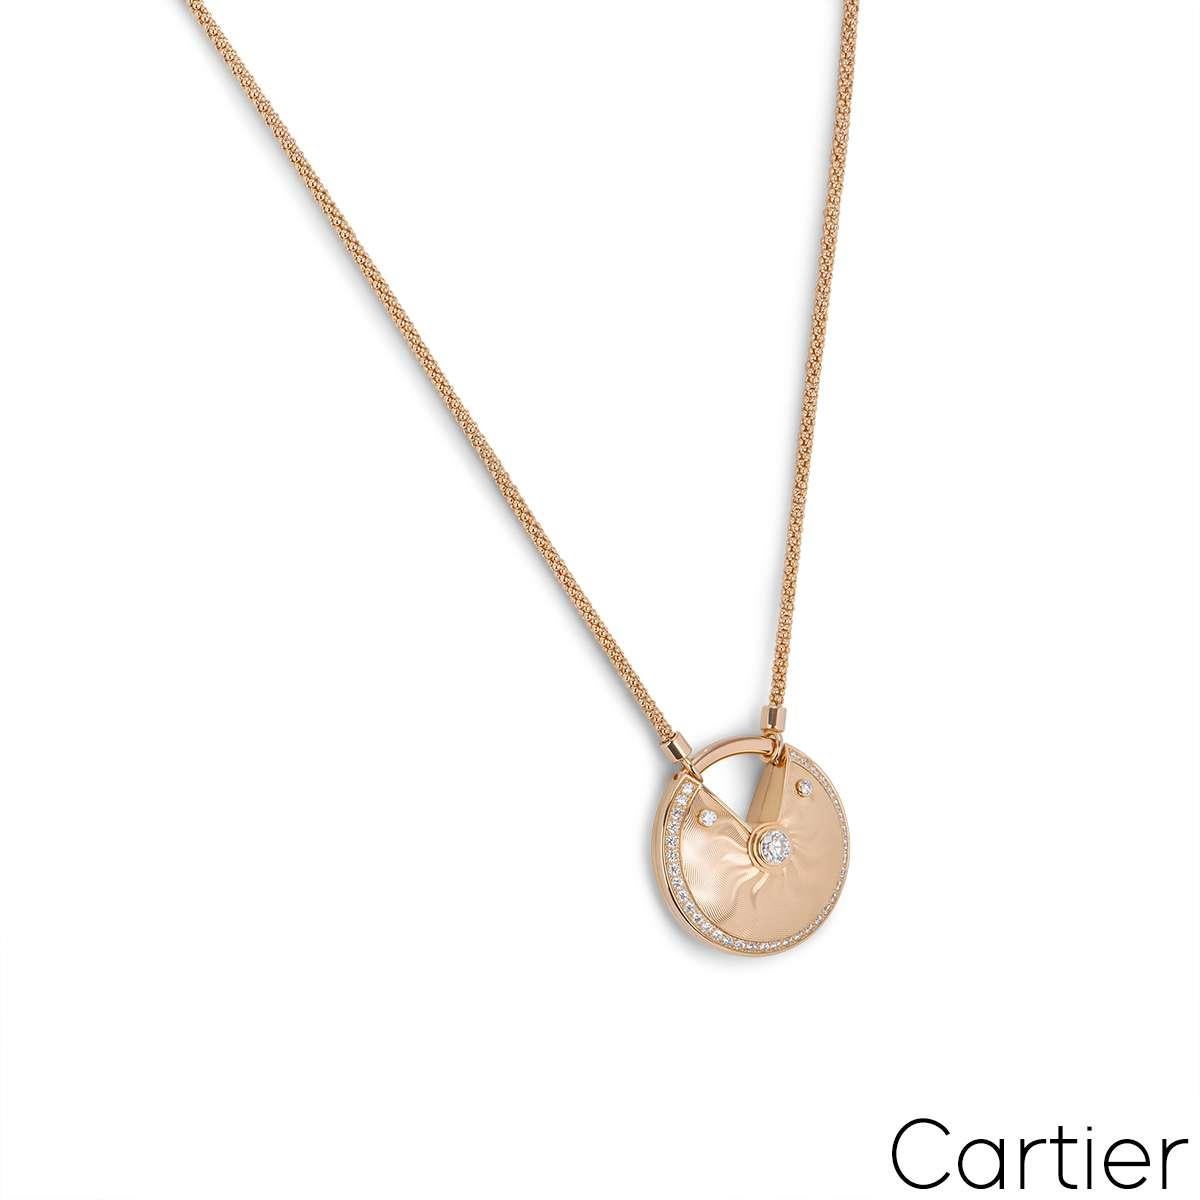 A gorgeous 18k rose gold diamond necklace by Cartier from the Amulette de Cartier collection. The necklace features a circular talisman displaying a guilloche pattern and is bezel set to the centre with a round brilliant cut diamond with an